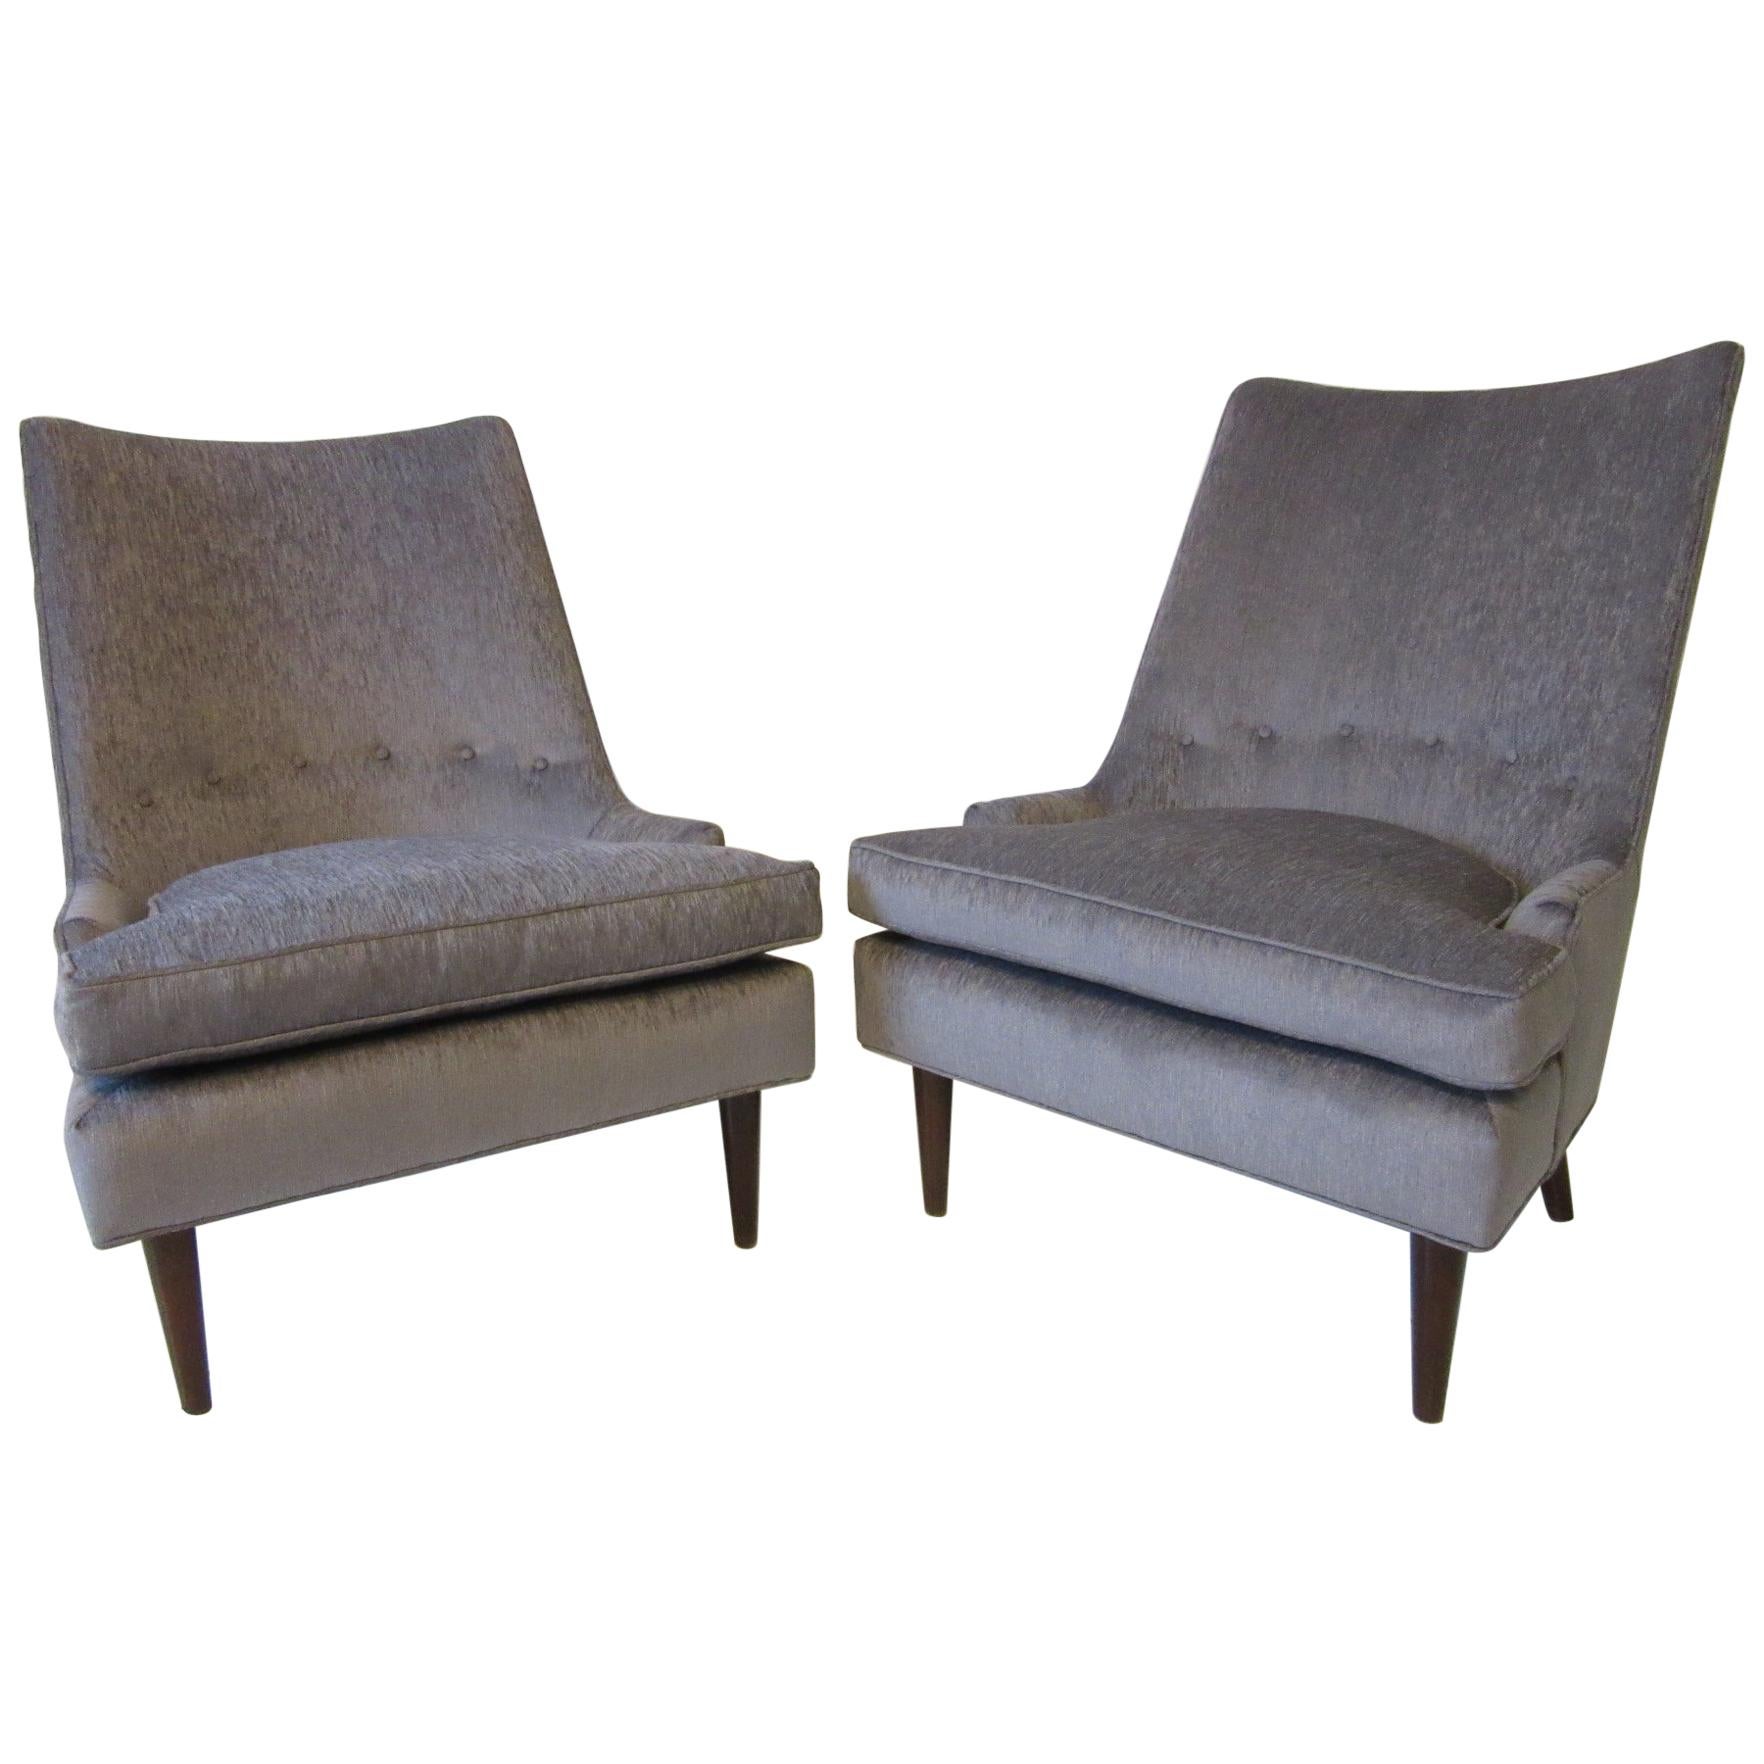 Midcentury Slipper Chairs in the Style of Heritage Henredon